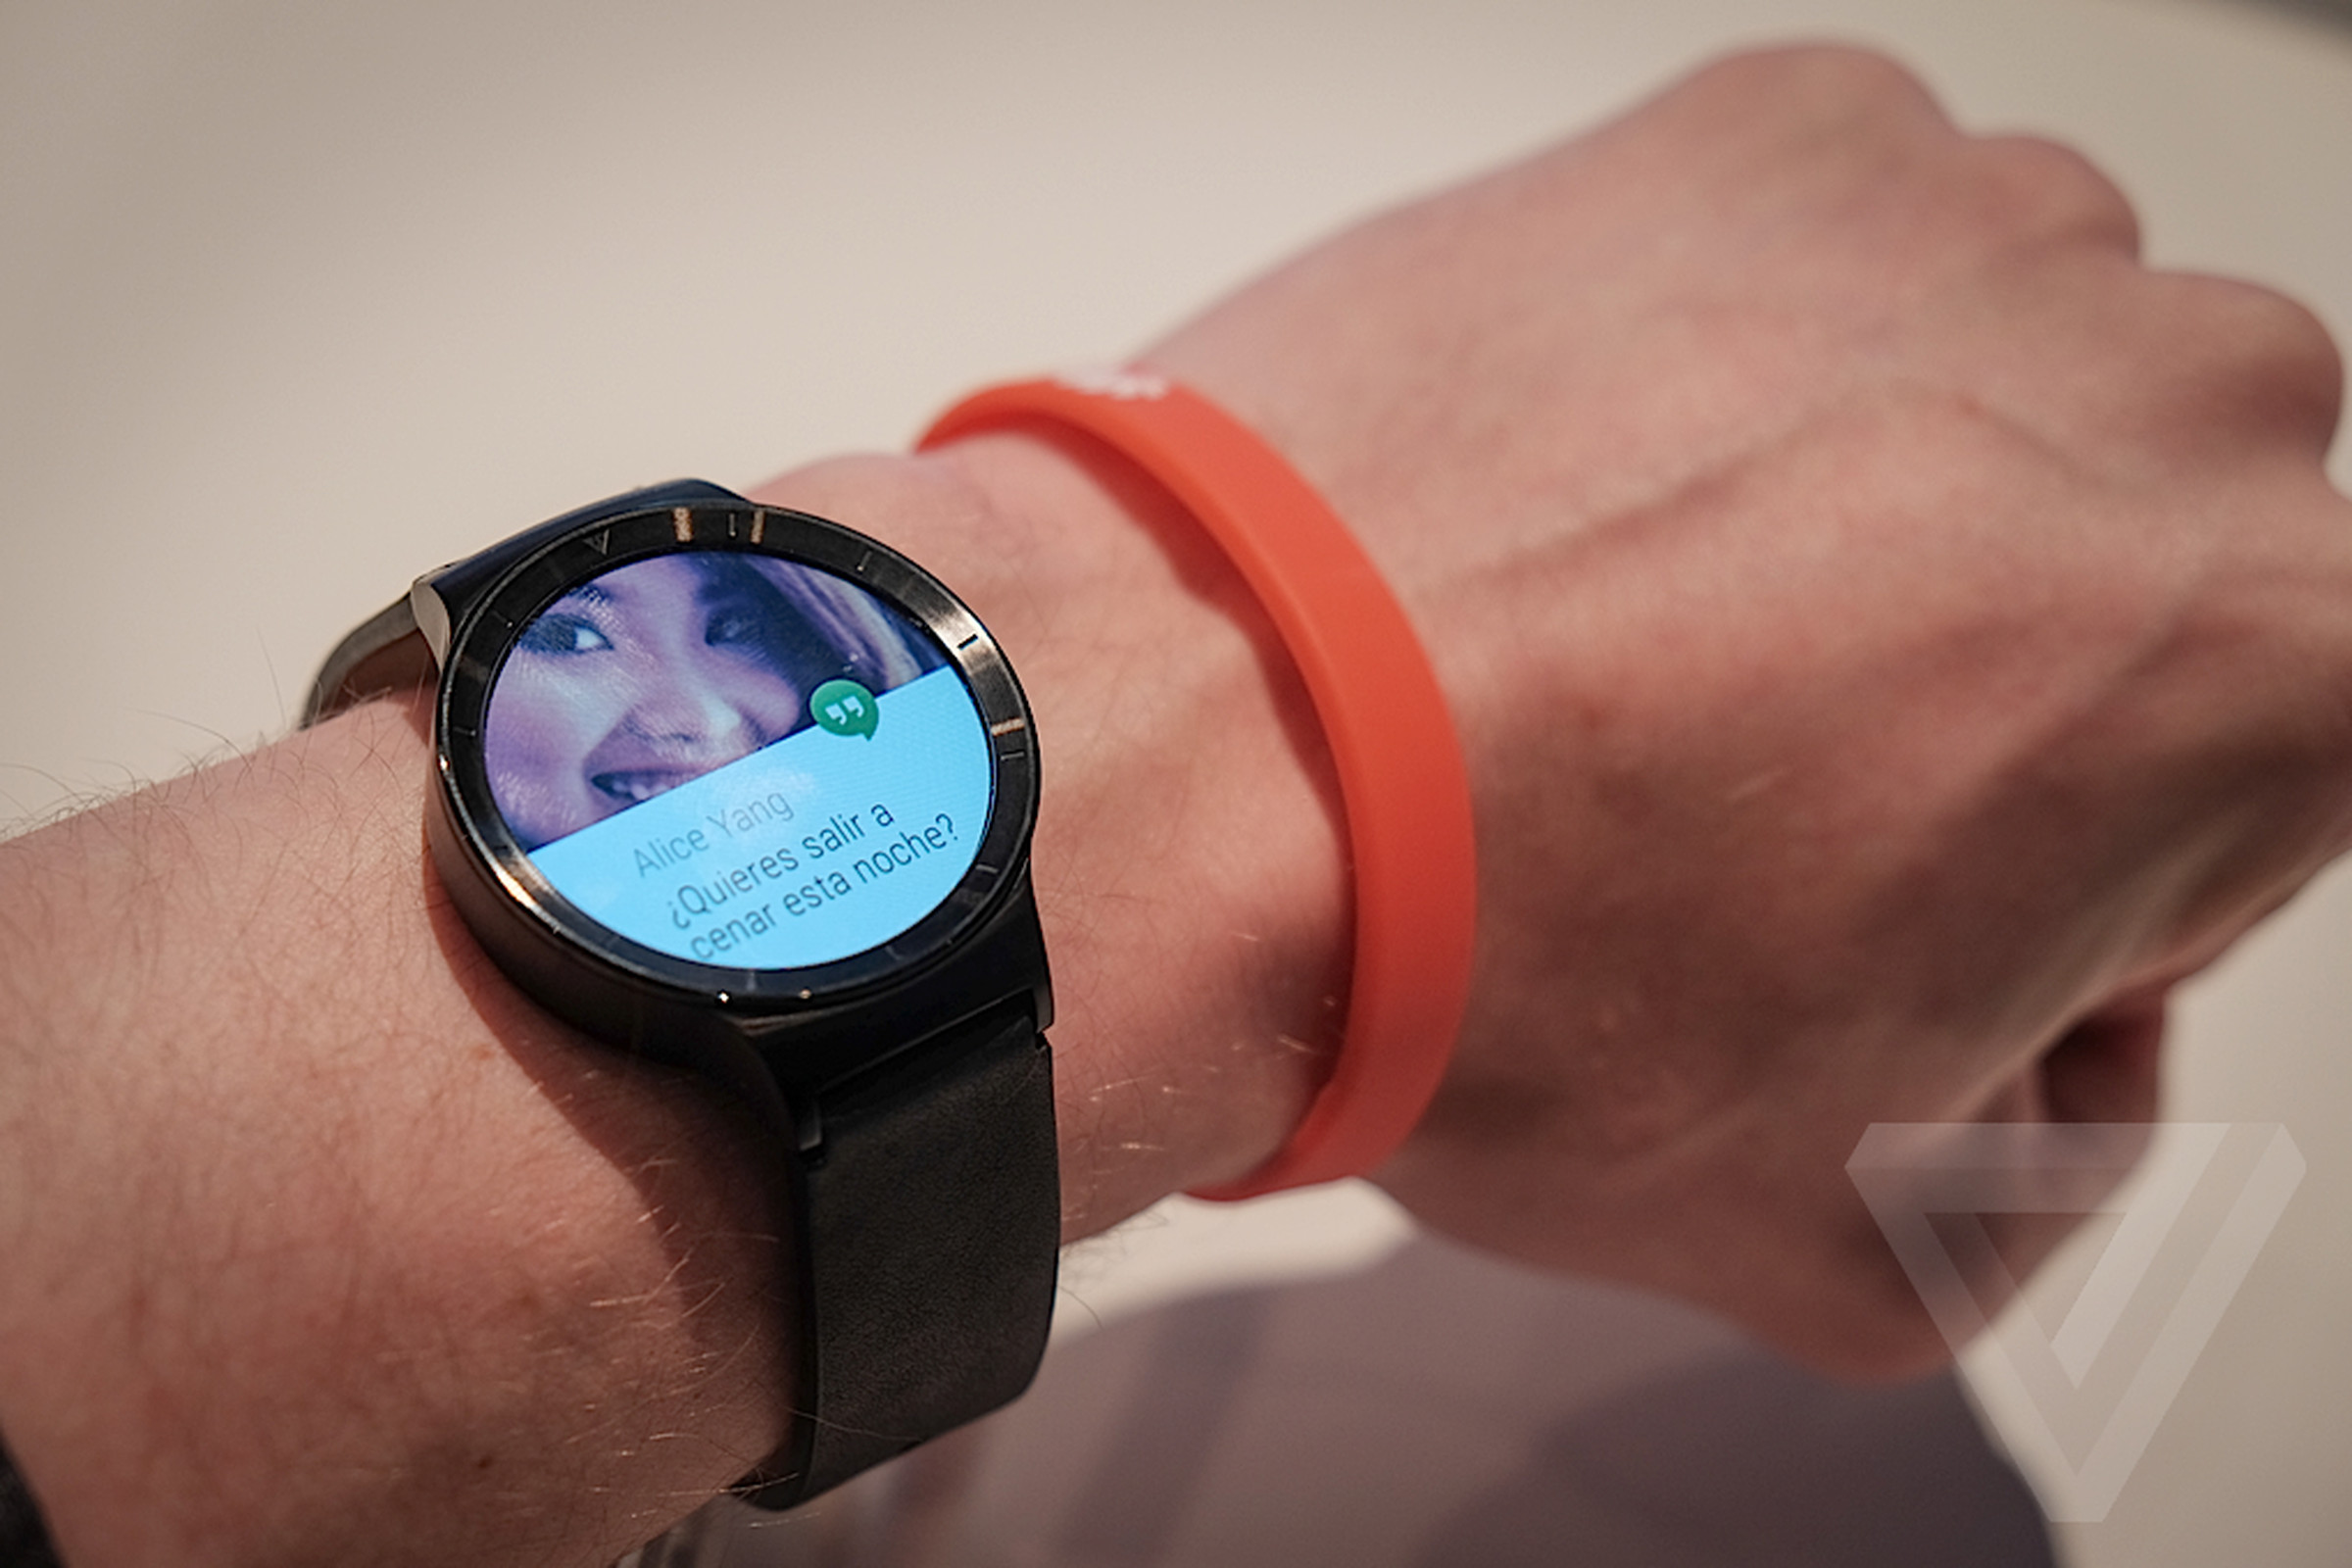 Huawei Watch hands-on photos